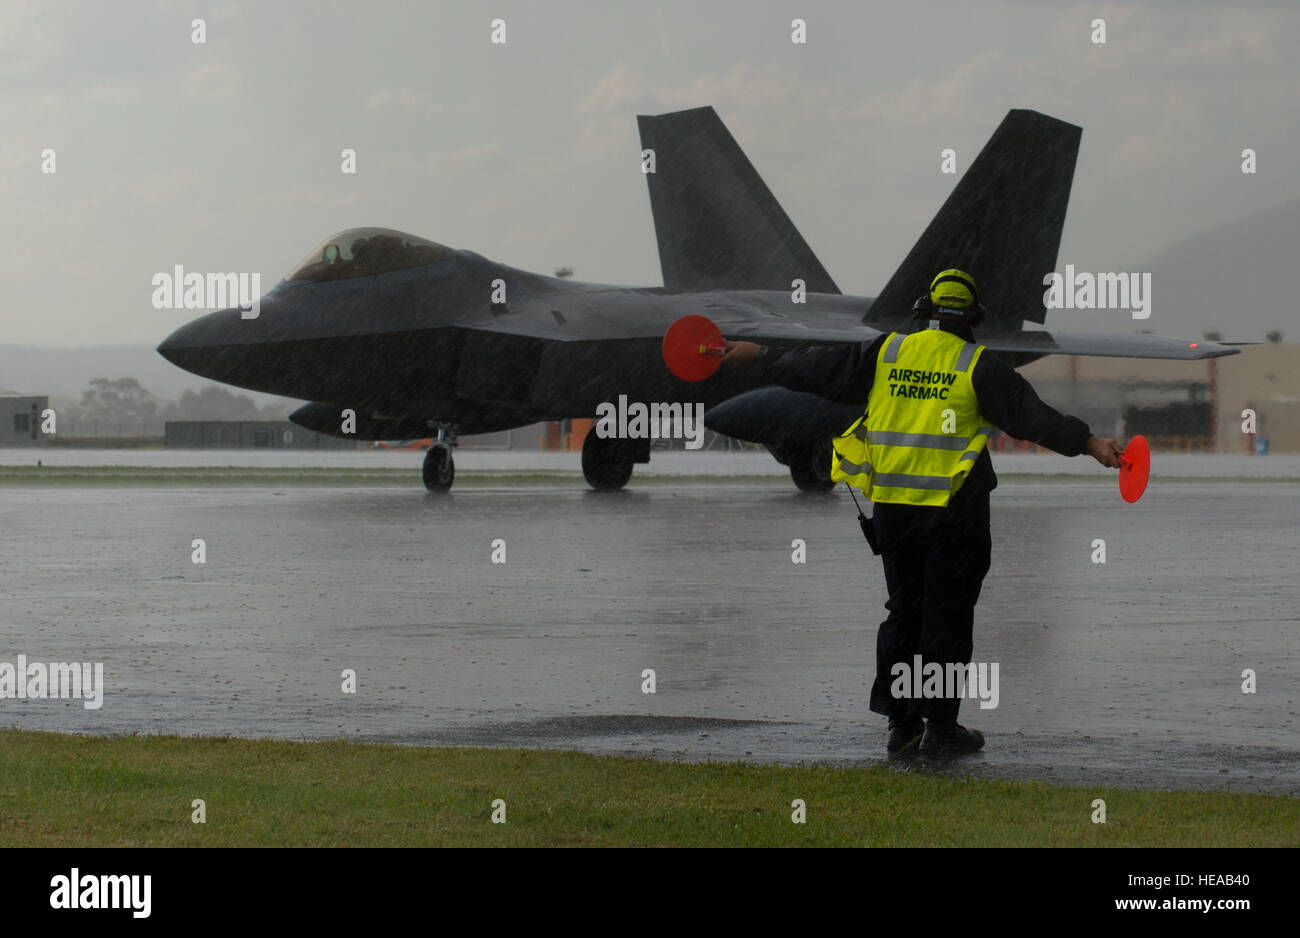 Lyn Jones, Aircraft Ground Operation Aviation Services section leader blue, marshalls an F-22 Raptor assigned to the 154th Wing at Joint Base Pearl Harbor-Hickam, Hawaii, at Avalon Airport, Victoria, Australia, Feb. 22, 2015. The U.S. participates in the Australian International Airshow and other similar events to demonstrate the U.S. focus on regional security and stability and support the rebalance to the Asia-Pacific region. Staff Sgt. Sheila deVera) Stock Photo